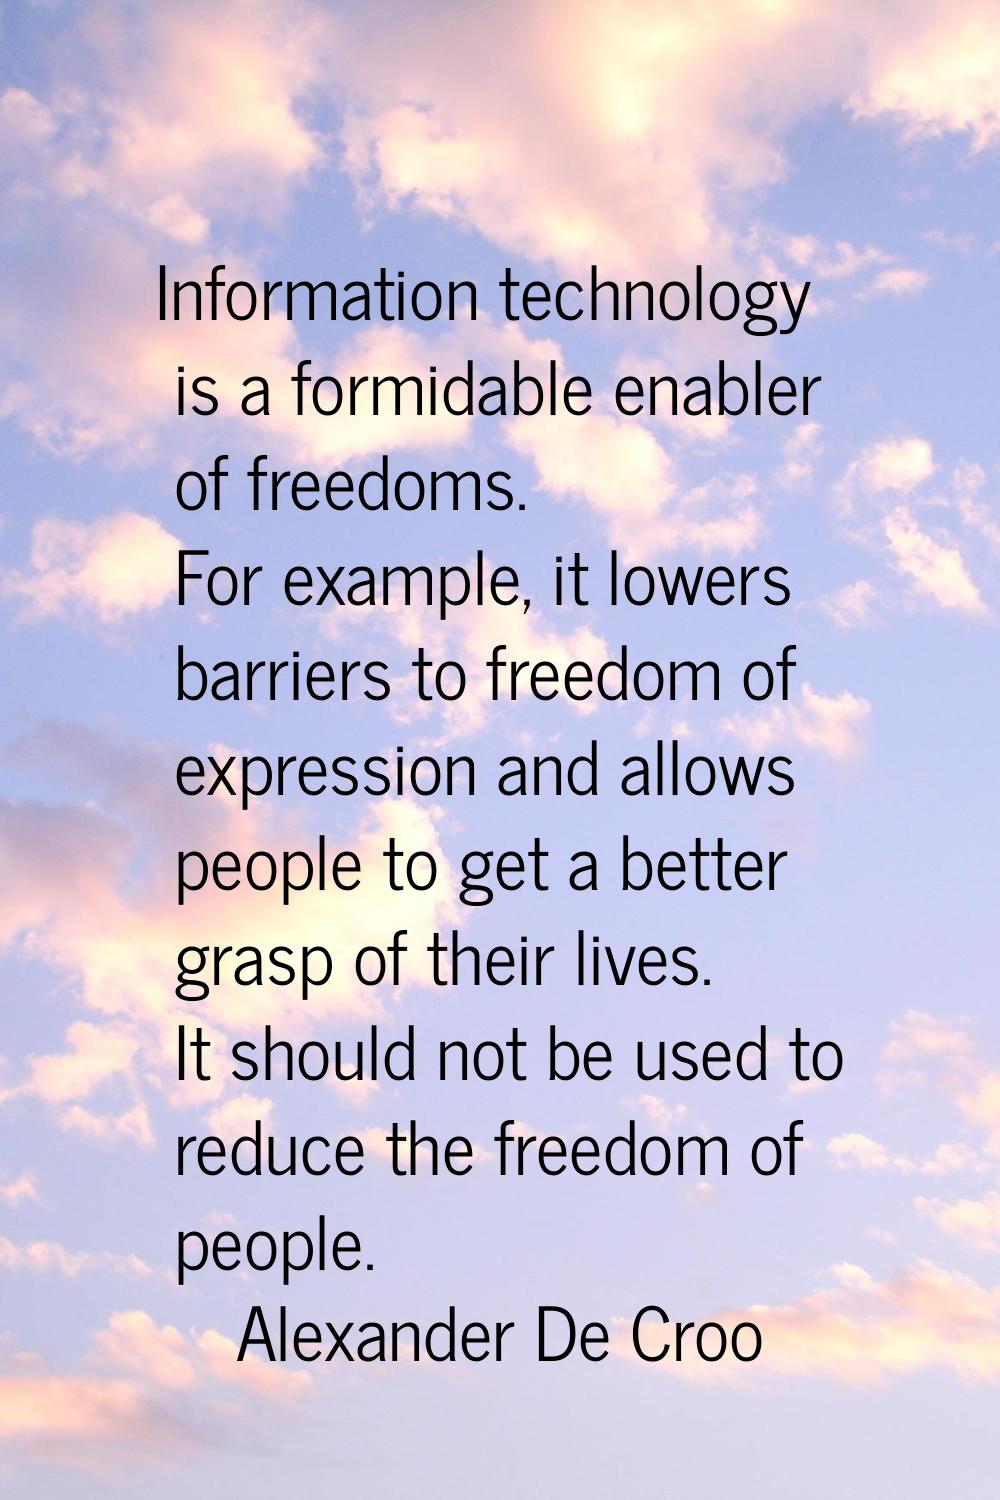 Information technology is a formidable enabler of freedoms. For example, it lowers barriers to free